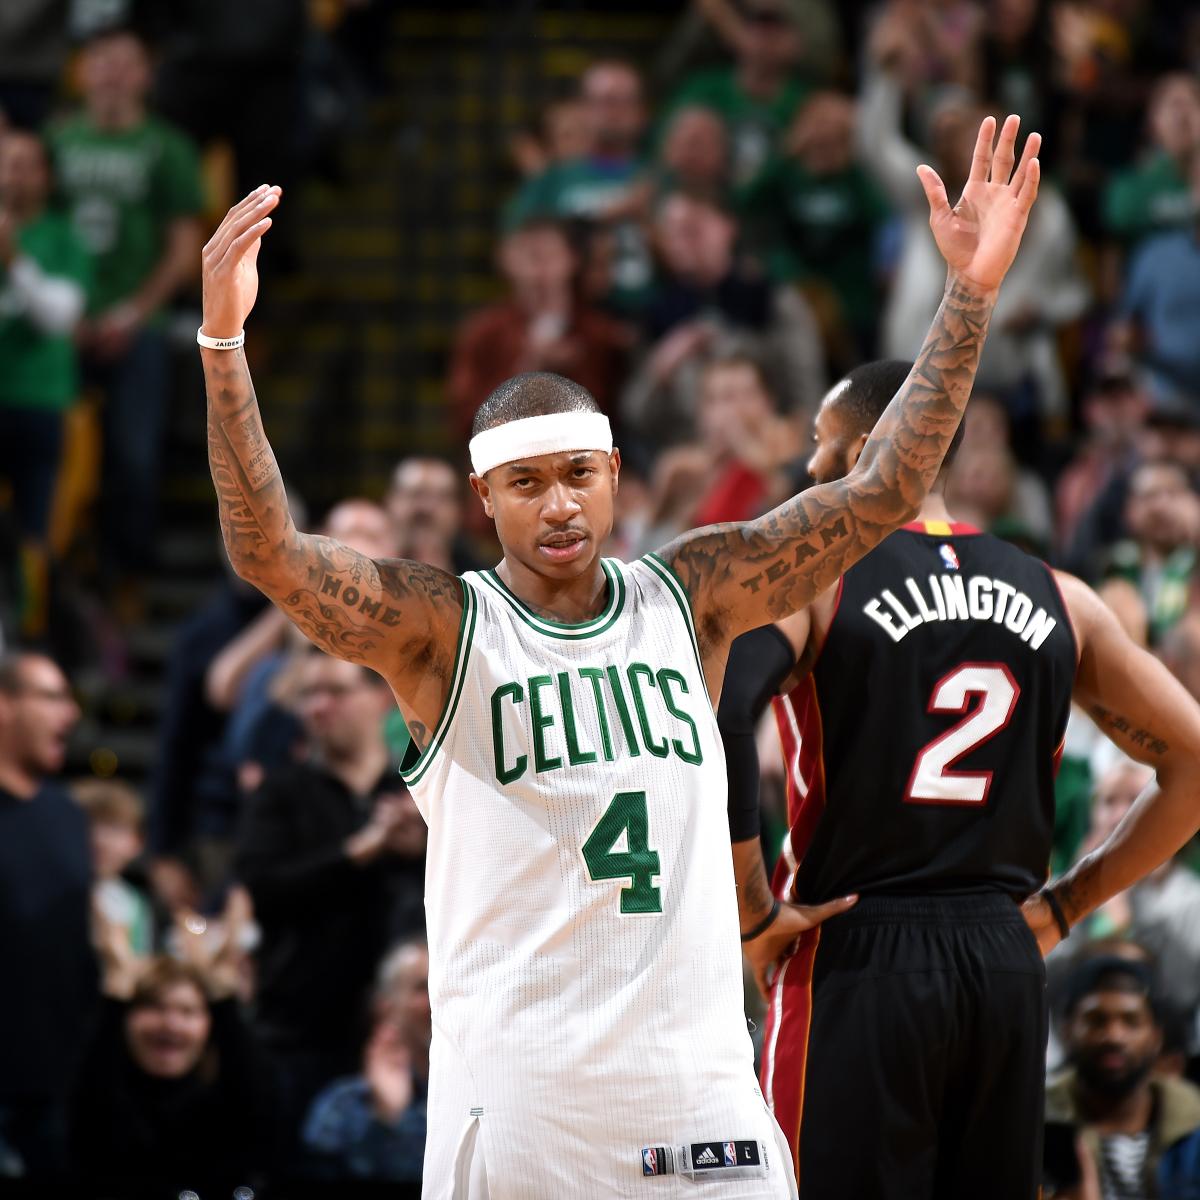 Crazy Stats - Isaiah Thomas (5-foot-9) is the shortest